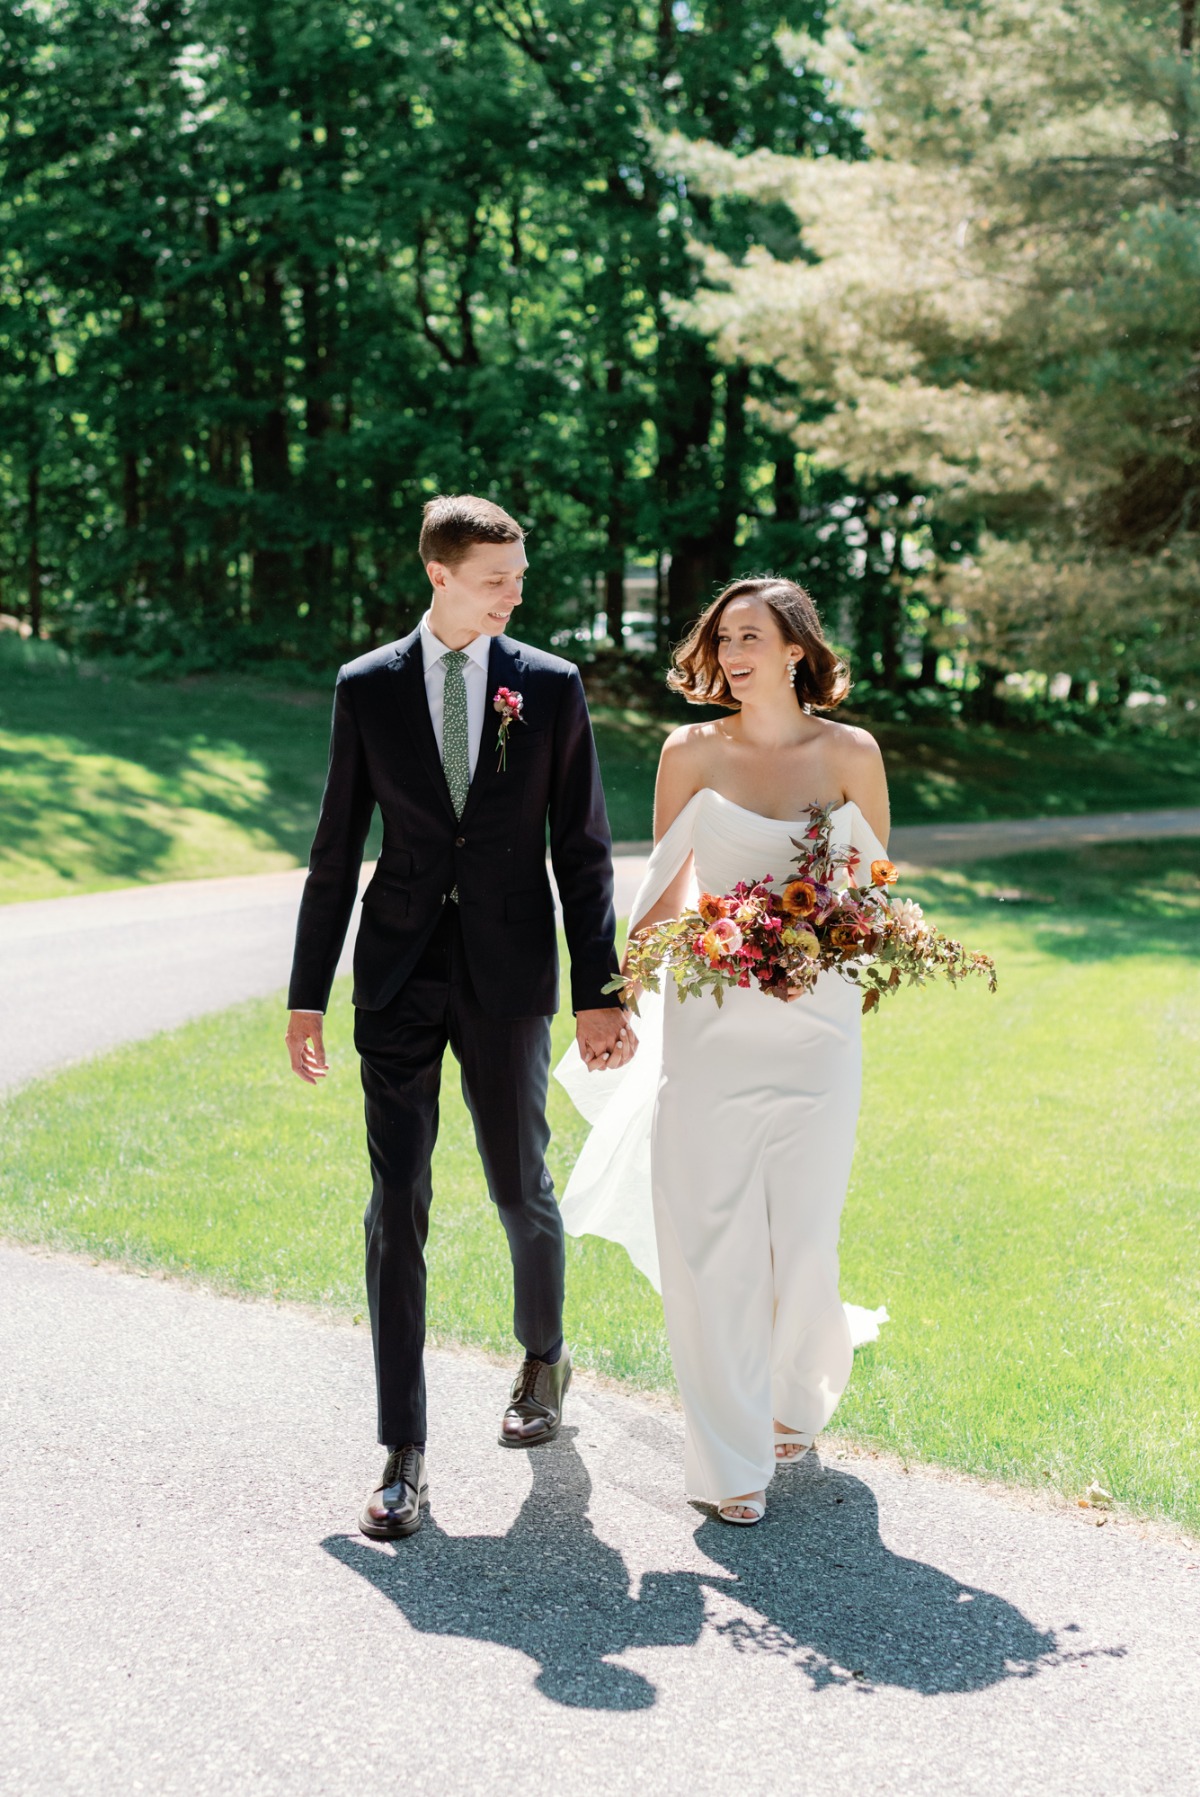 Timeless and romantic bride and groom fashion